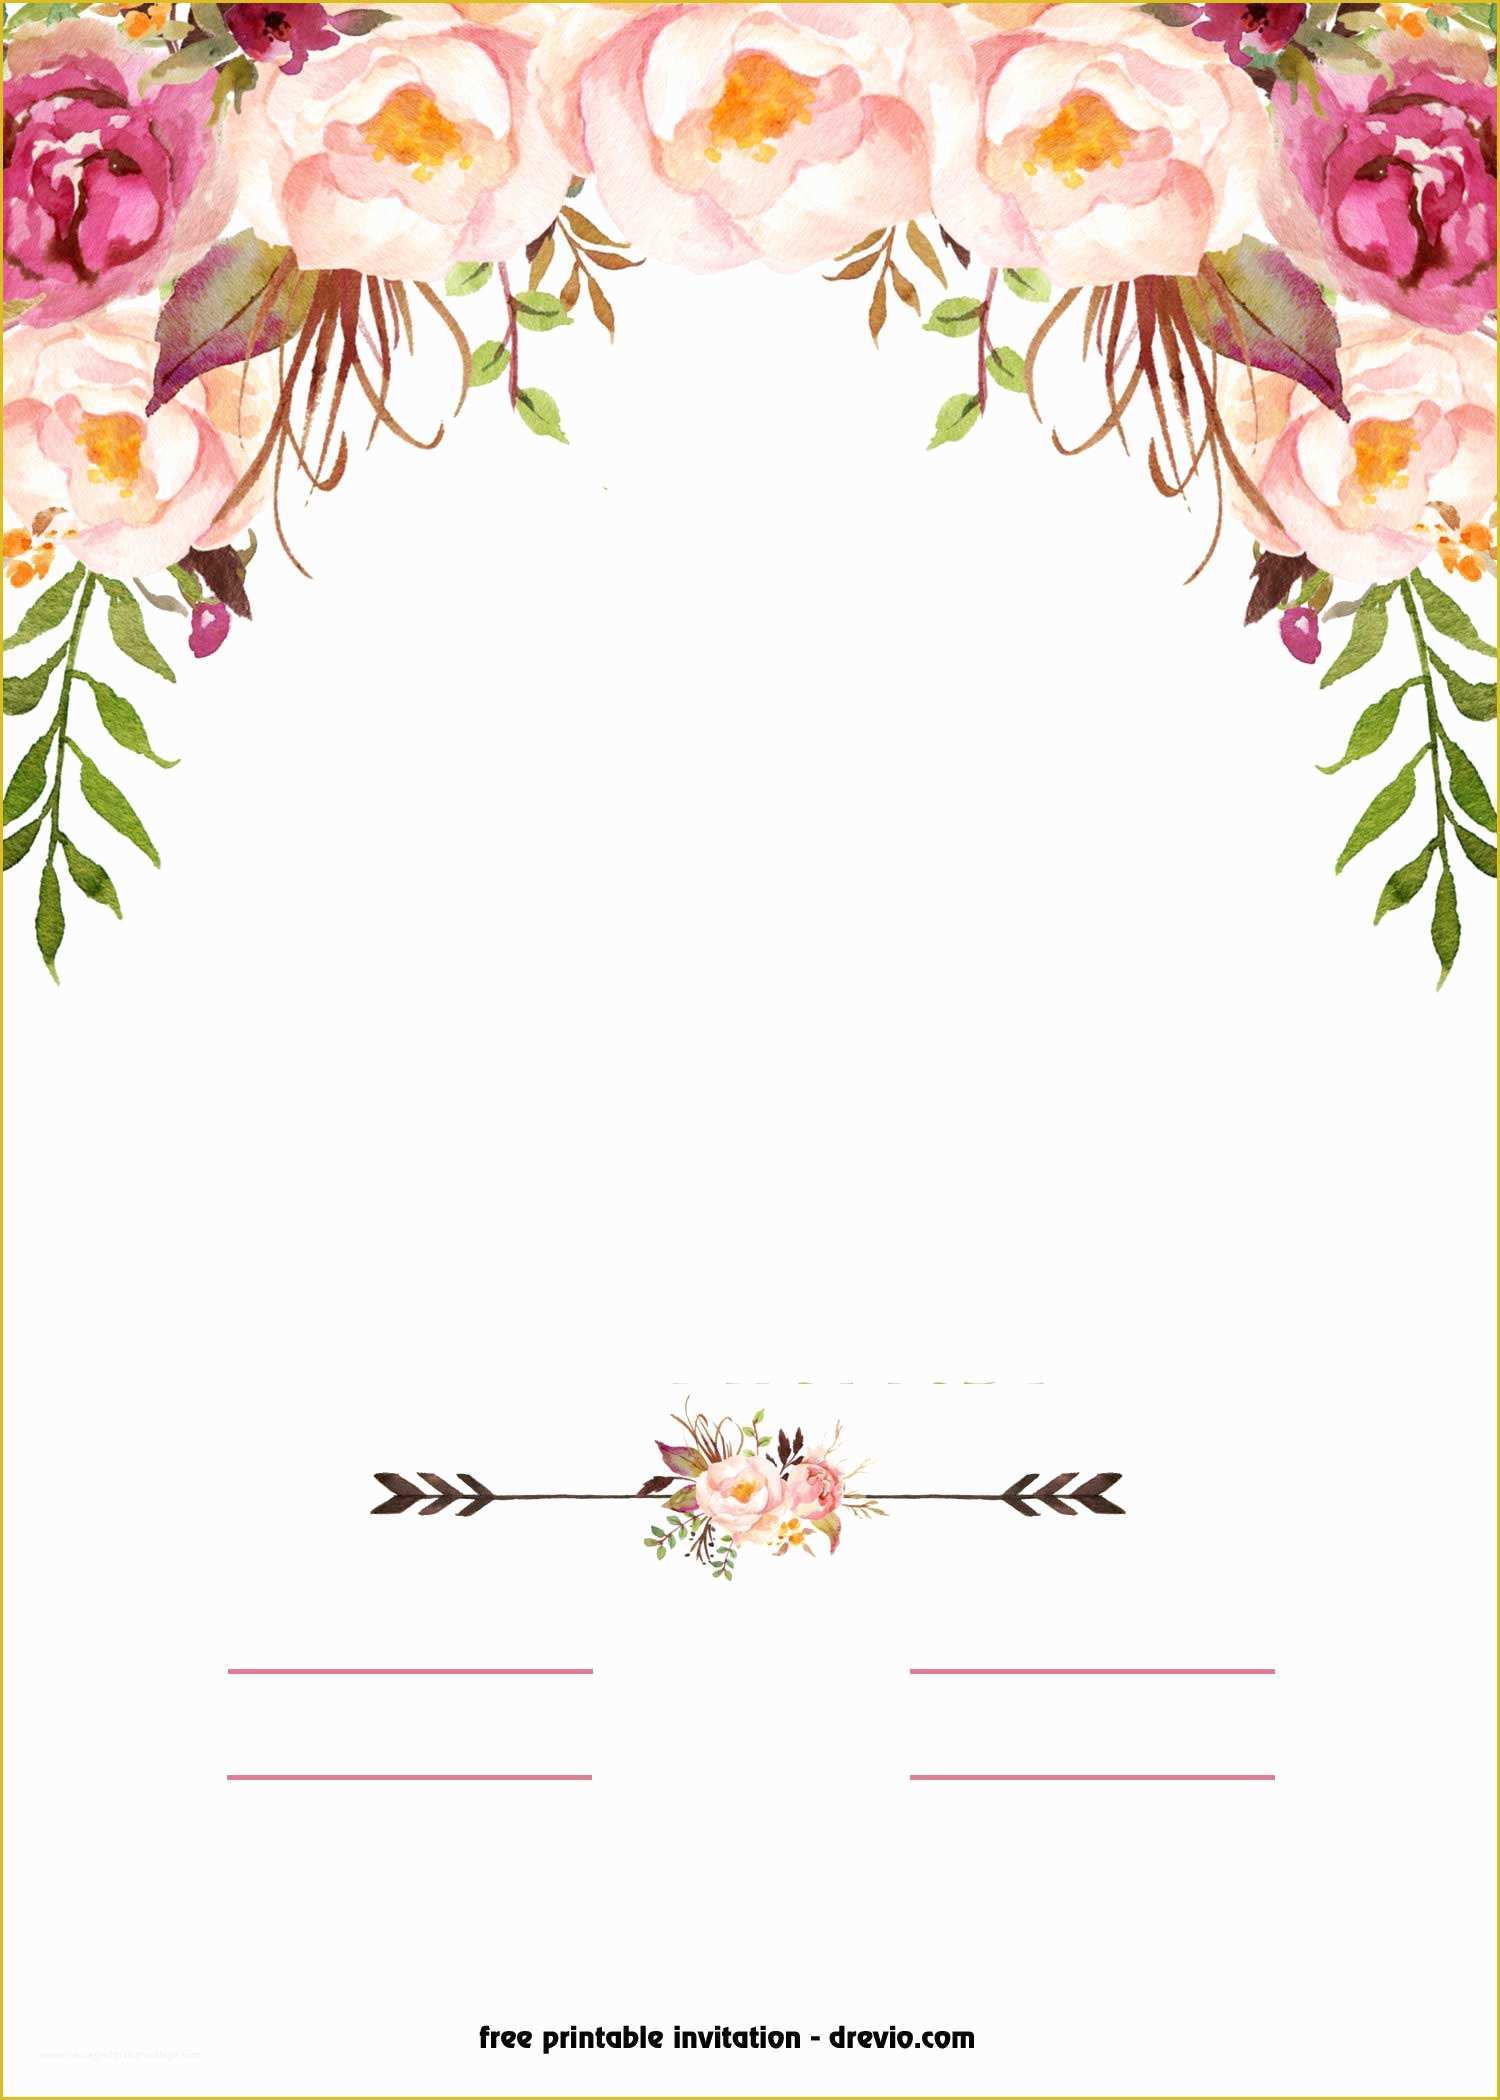 Free Online Baby Shower Invitations Templates Of Free Printable Boho Chic Flower Baby Shower Invitation